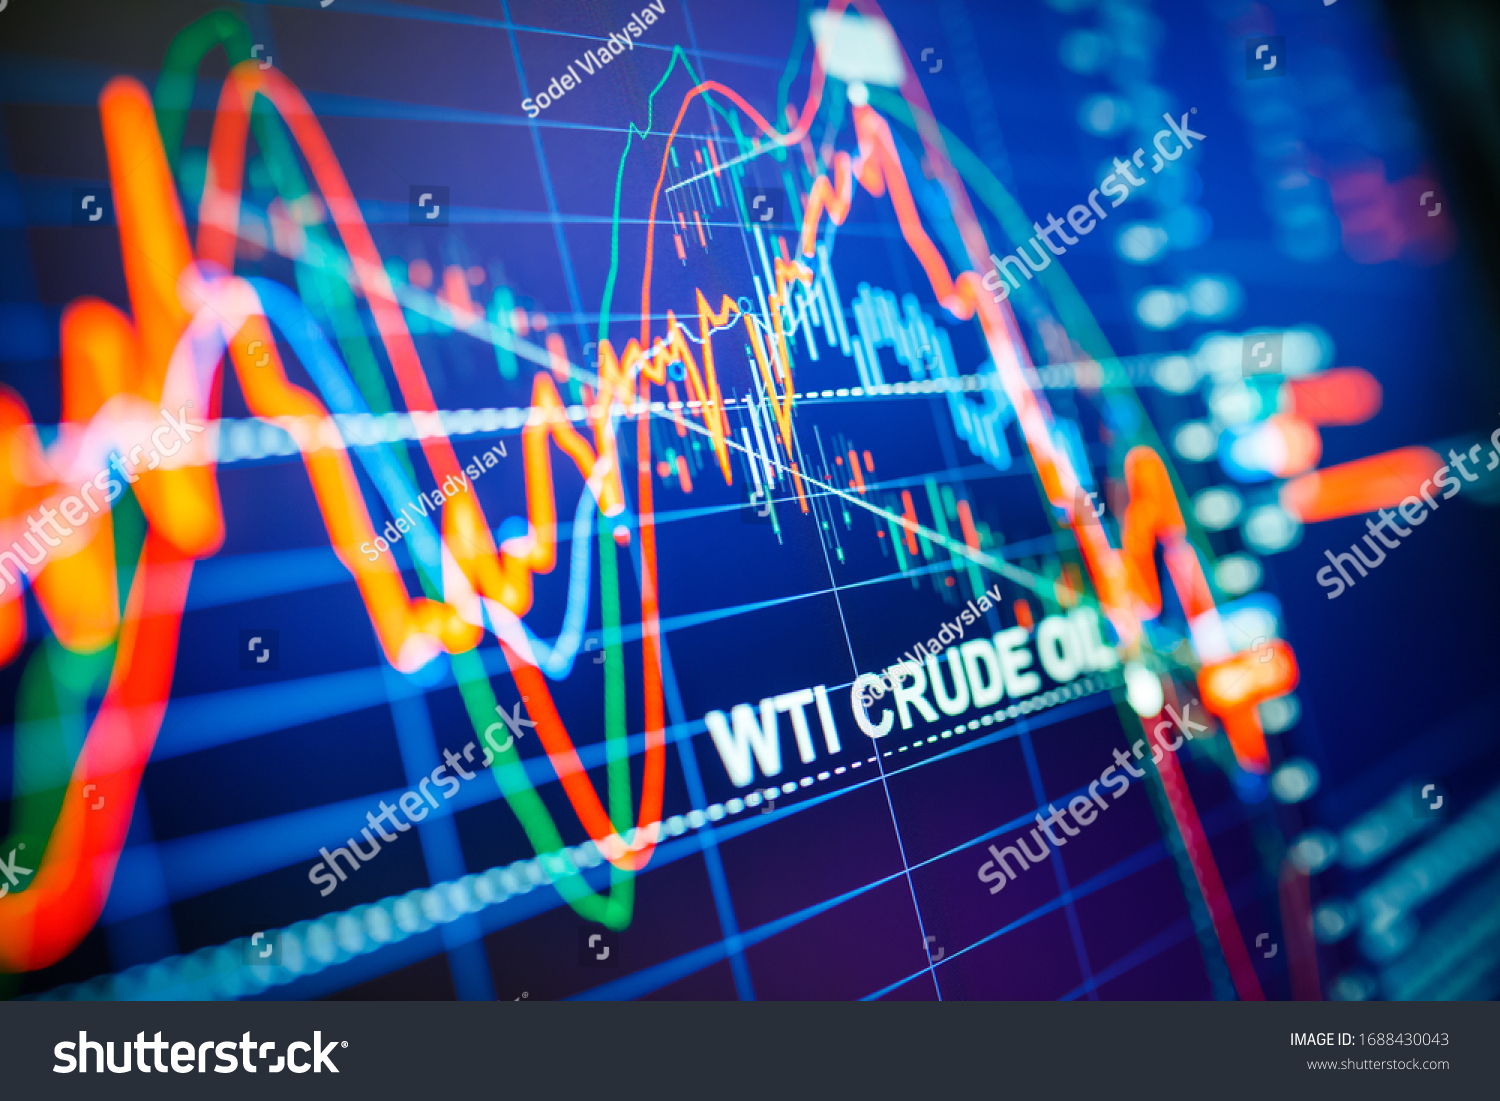 Data analyzing in commodities energy market: the charts and quotes on display. US WTI crude oil price analysis. Stunning price drop for the last 20 years. #1688430043